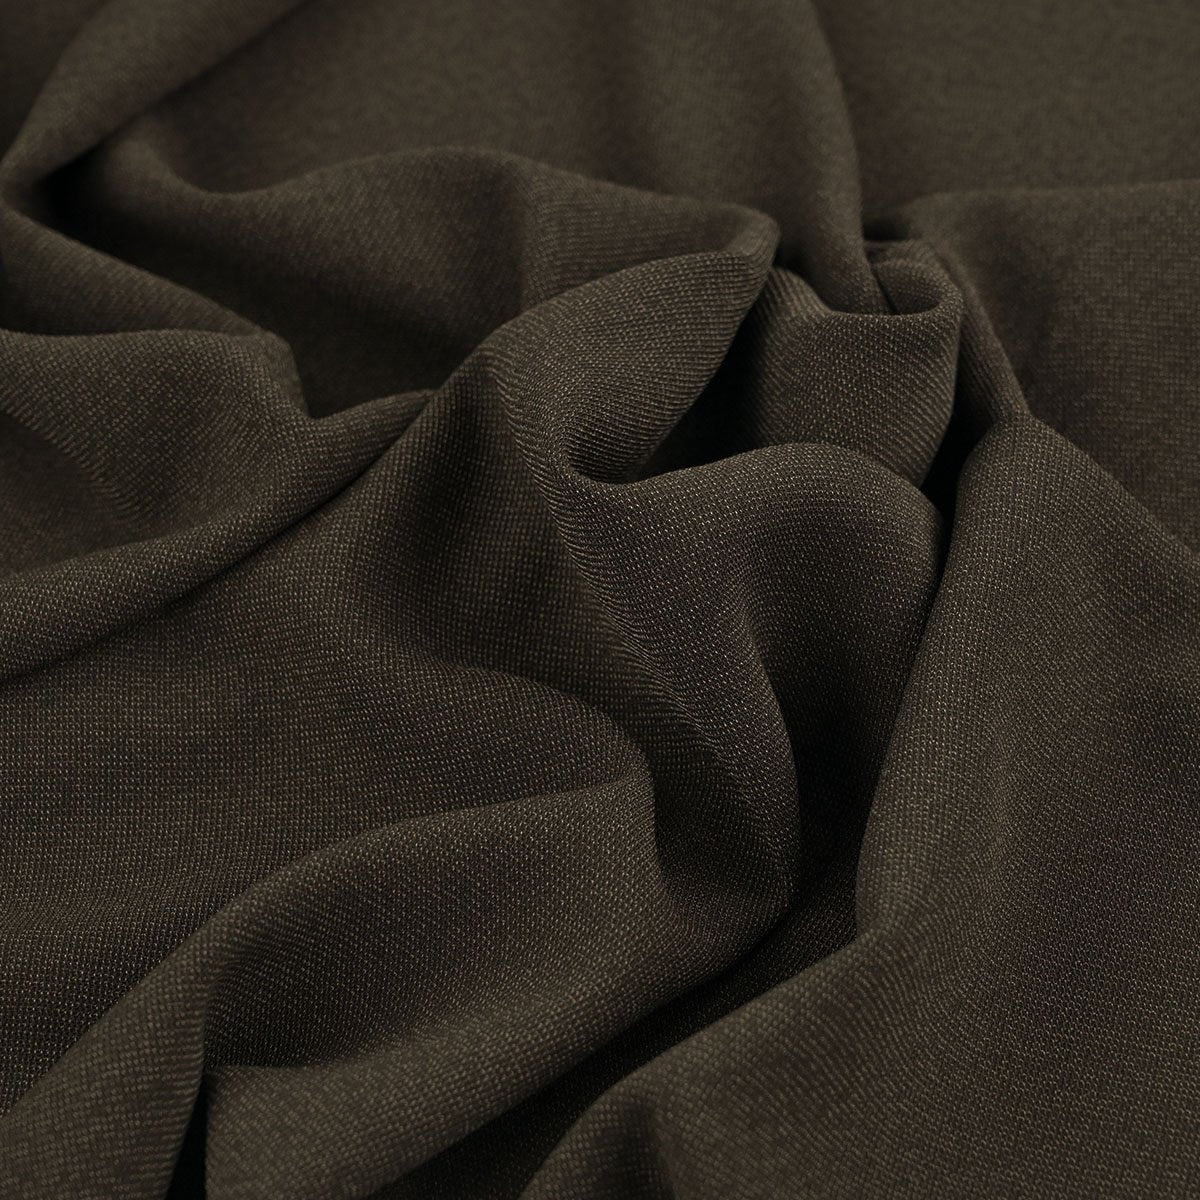 Brown Suiting Fabric 107